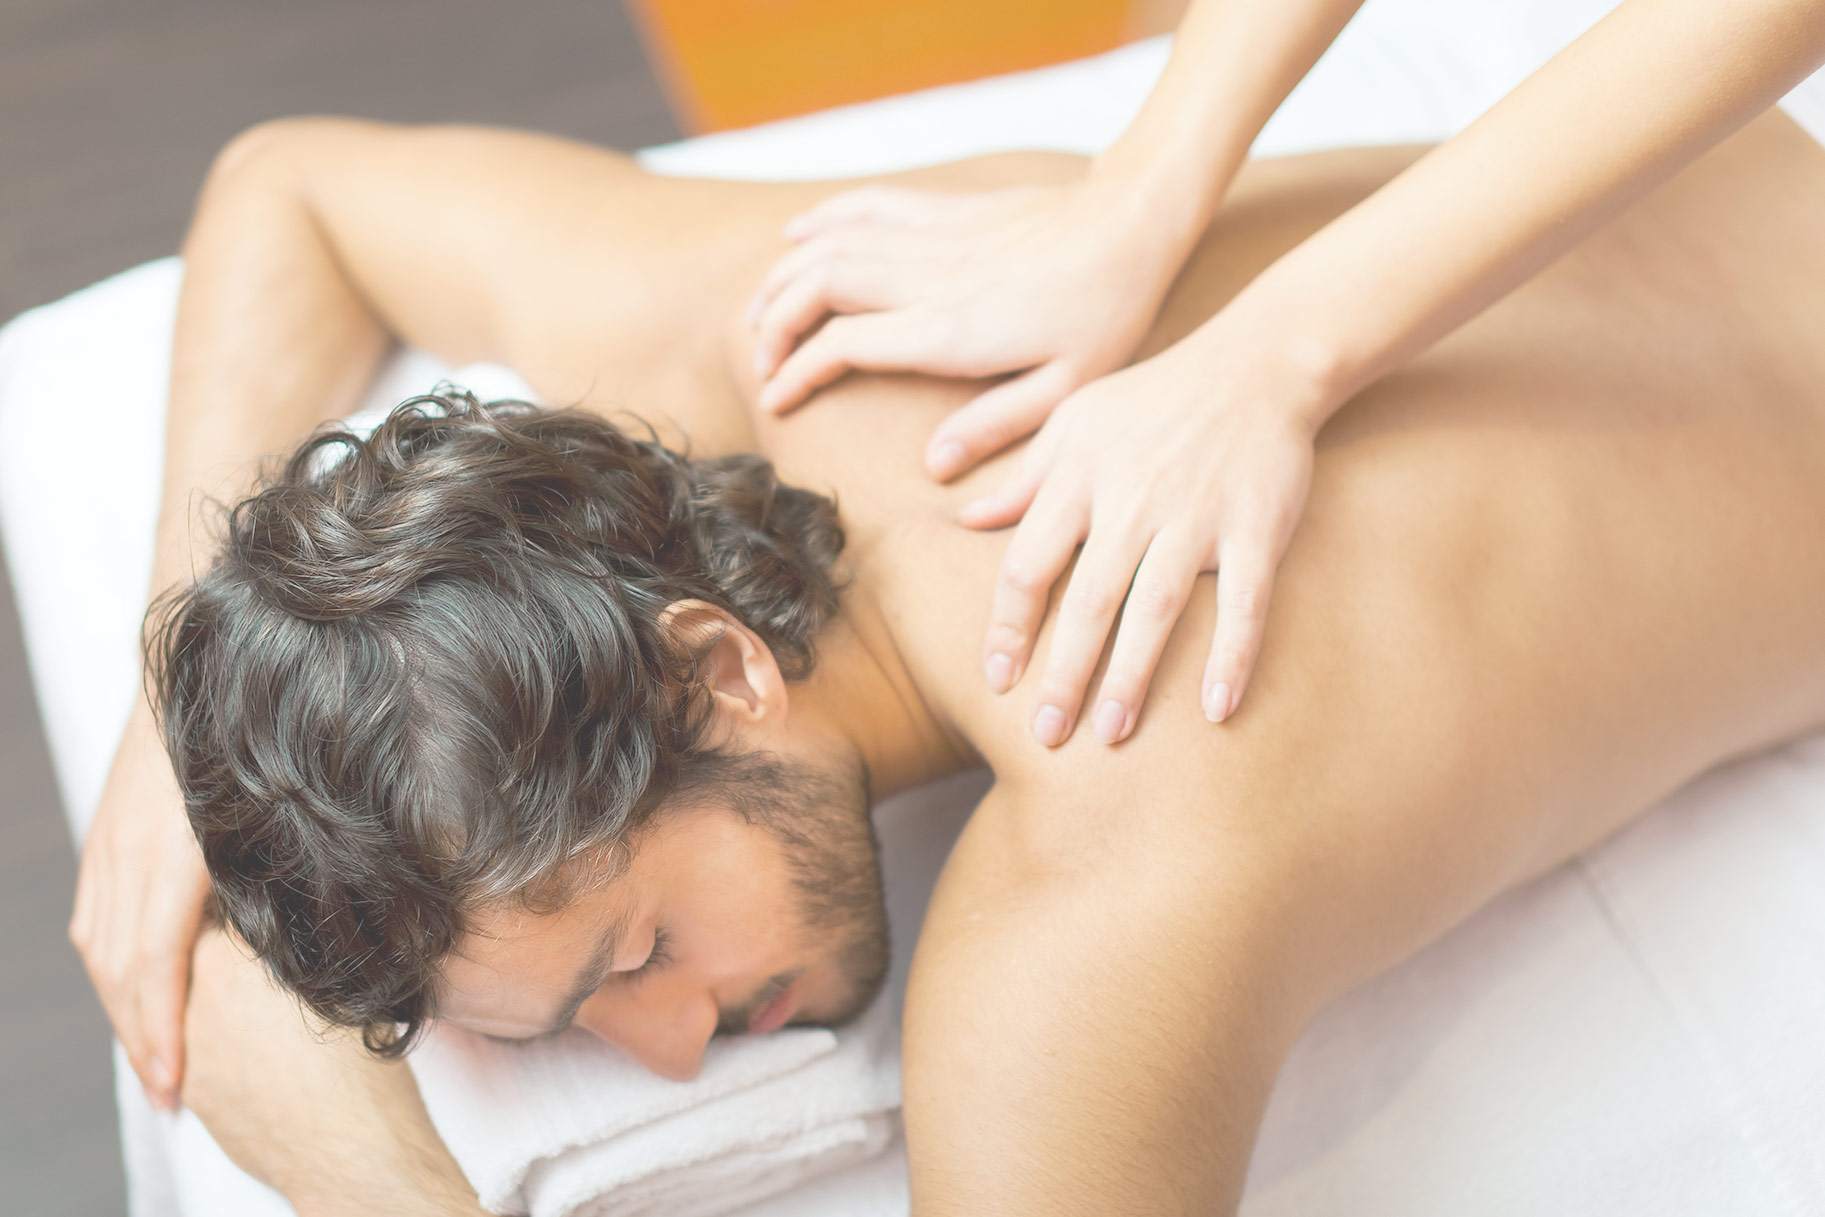 Best of Massage place with happy ending